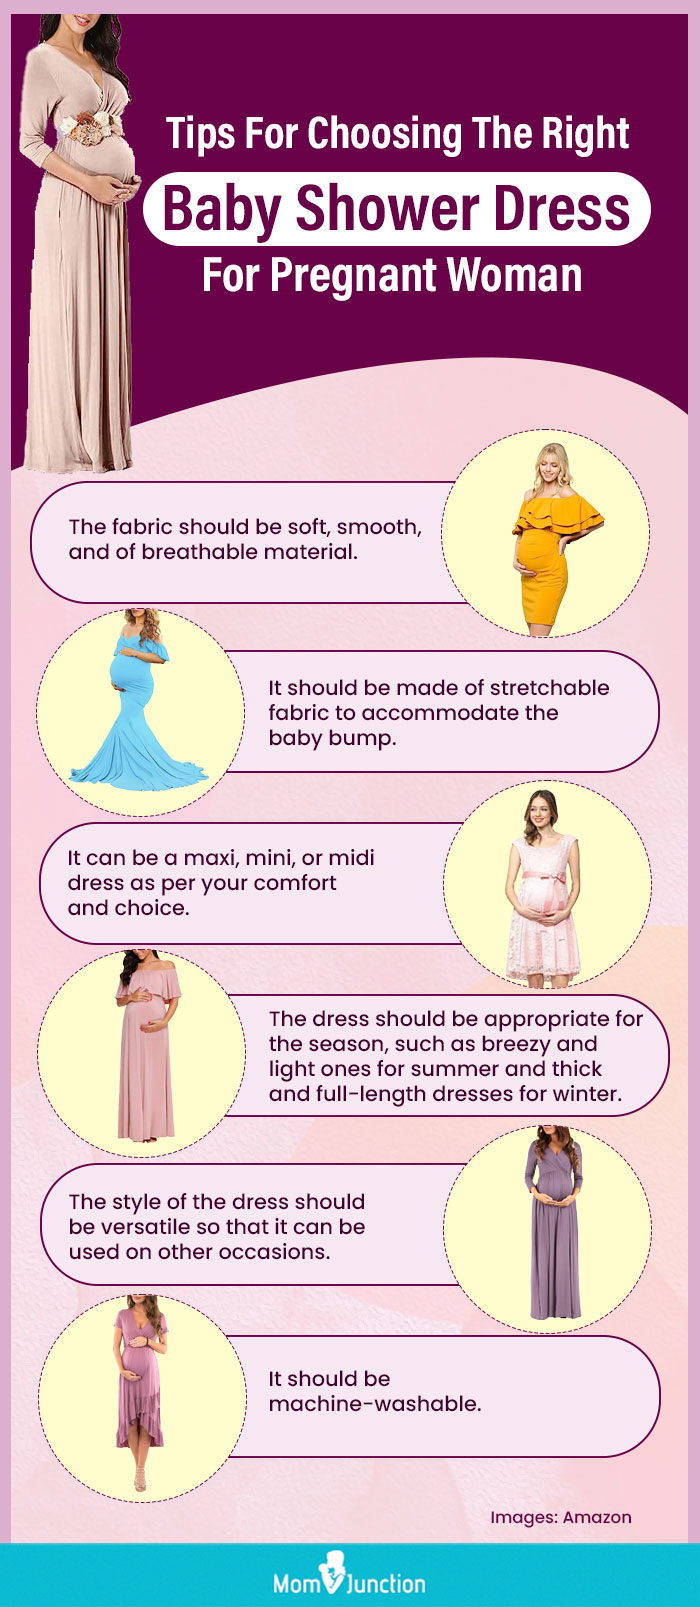 Tips For Choosing The Right Baby Shower Dress For Pregnant Woman (infographic)